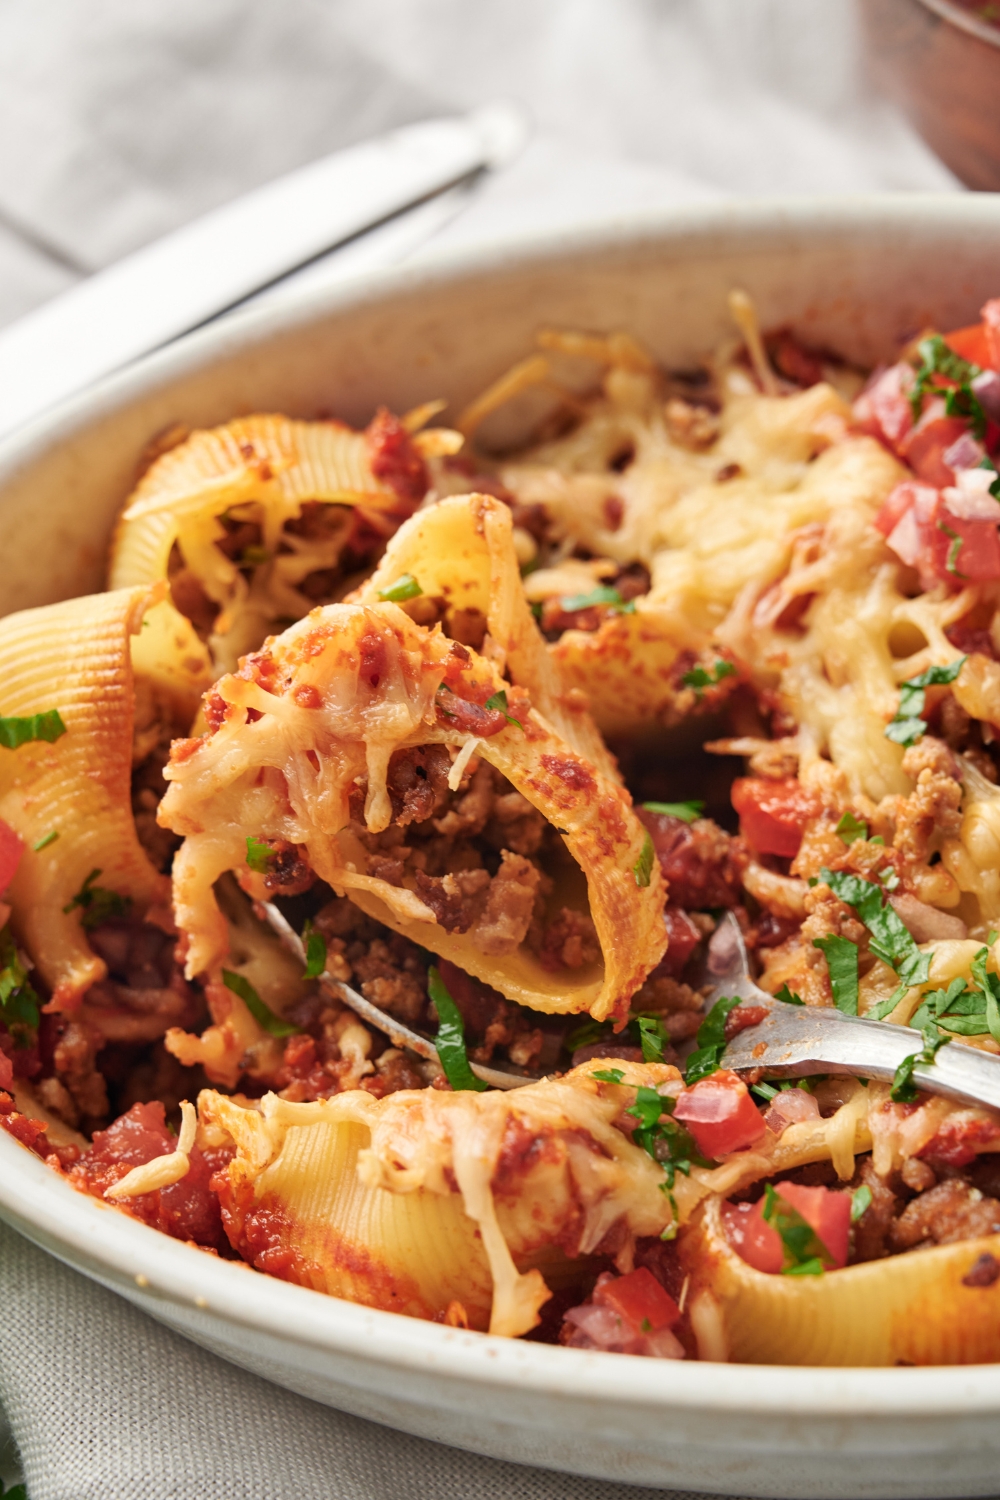 A baking dish filled with pasta shells stuffed with seasoned ground meat and melted cheese with fresh herbs and pico de gallo on top.